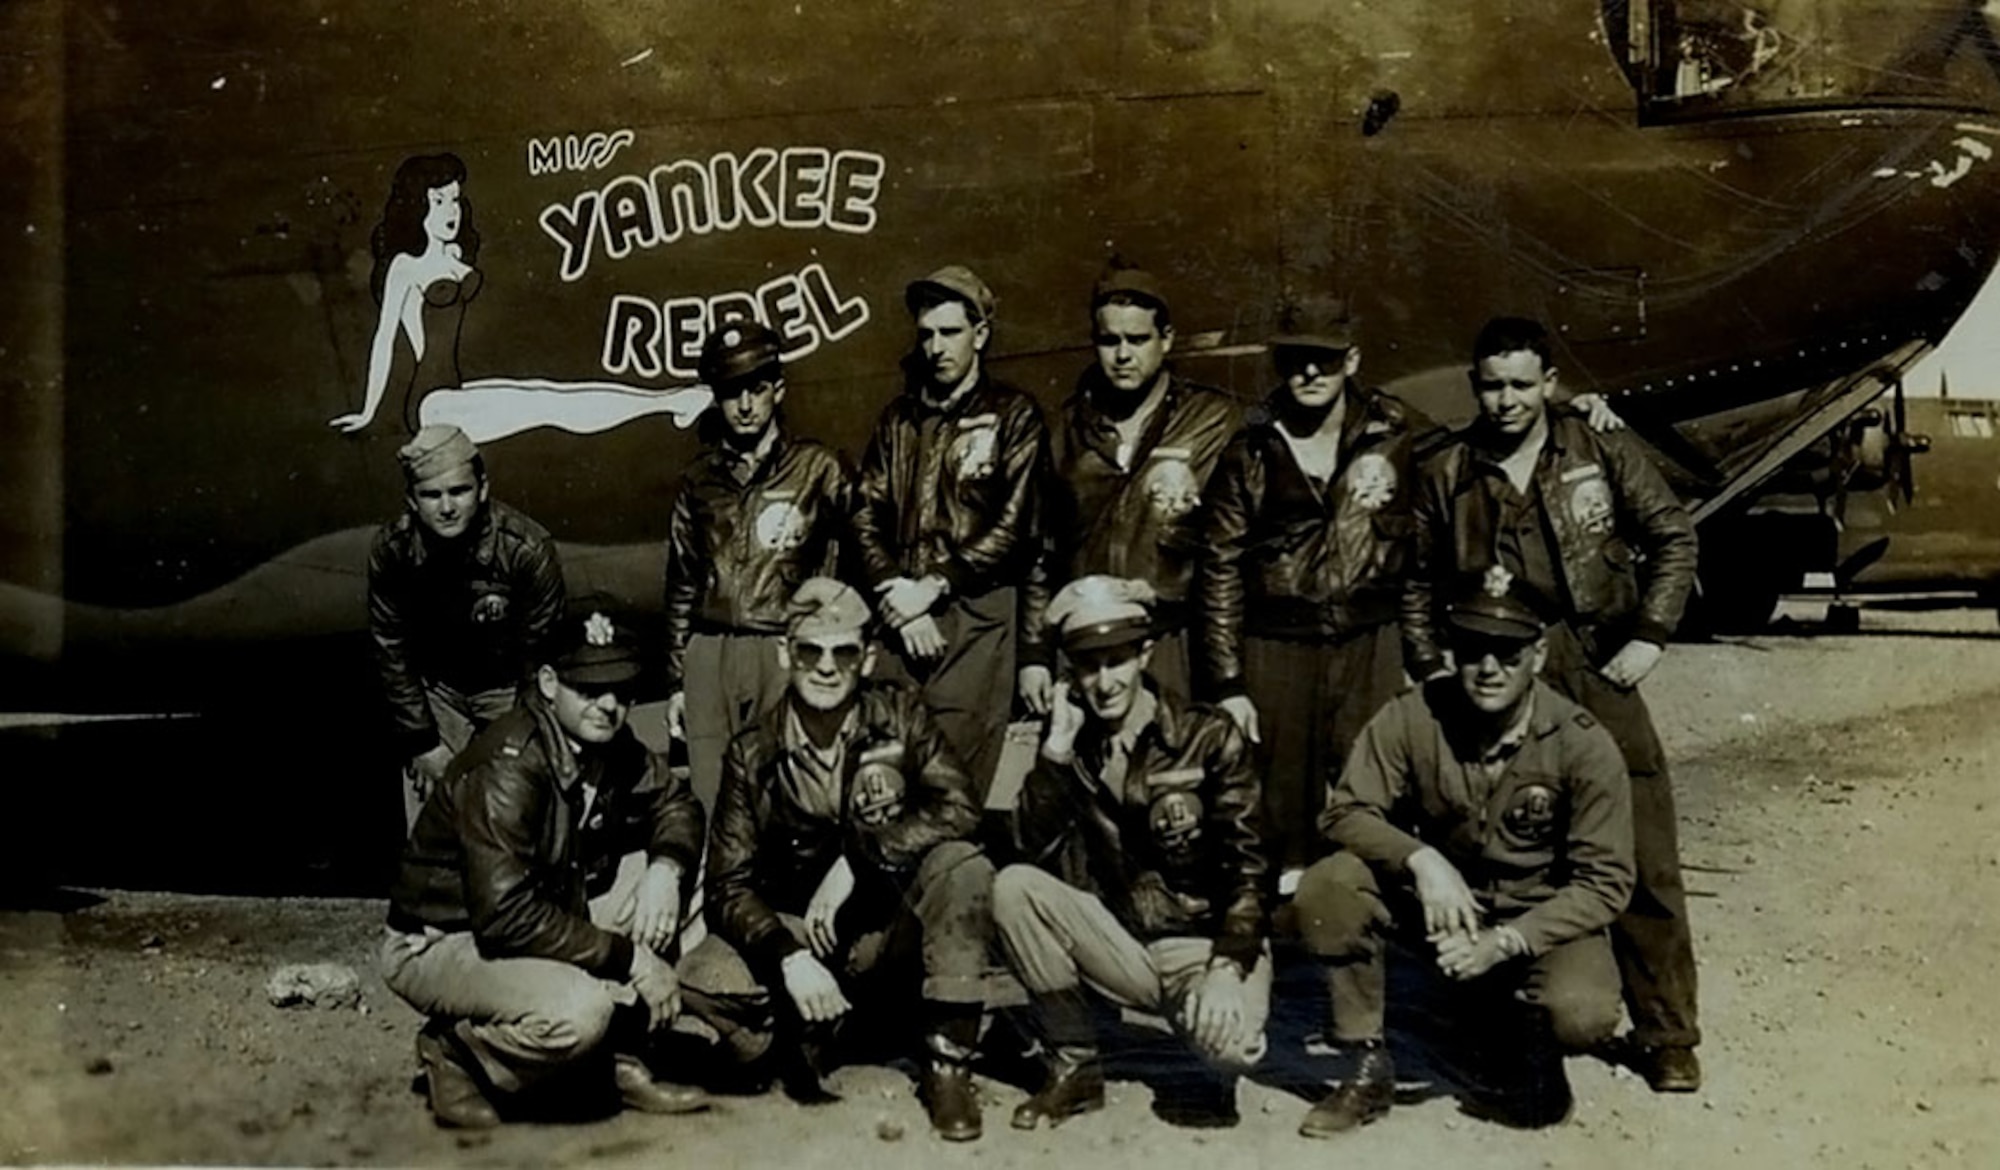 U.S. Army Air Corps 1st Lt. John D. Crouchley, kneeling, second right, and his crew pose for a photo by their B-24 Liberator, “Miss Yankee Rebel” in 1944. Crouchley was assigned to the 828th Bombardment Squadron, 485th Bombardment Group, Foggia, Italy, and went into combat in May 1944. Just one month later, he paid the ultimate sacrifice for his country when his aircraft was shot down over Bulgaria when he and his crew were returning from a bombing mission over Romania June 28, 1944. (Courtesy photo)